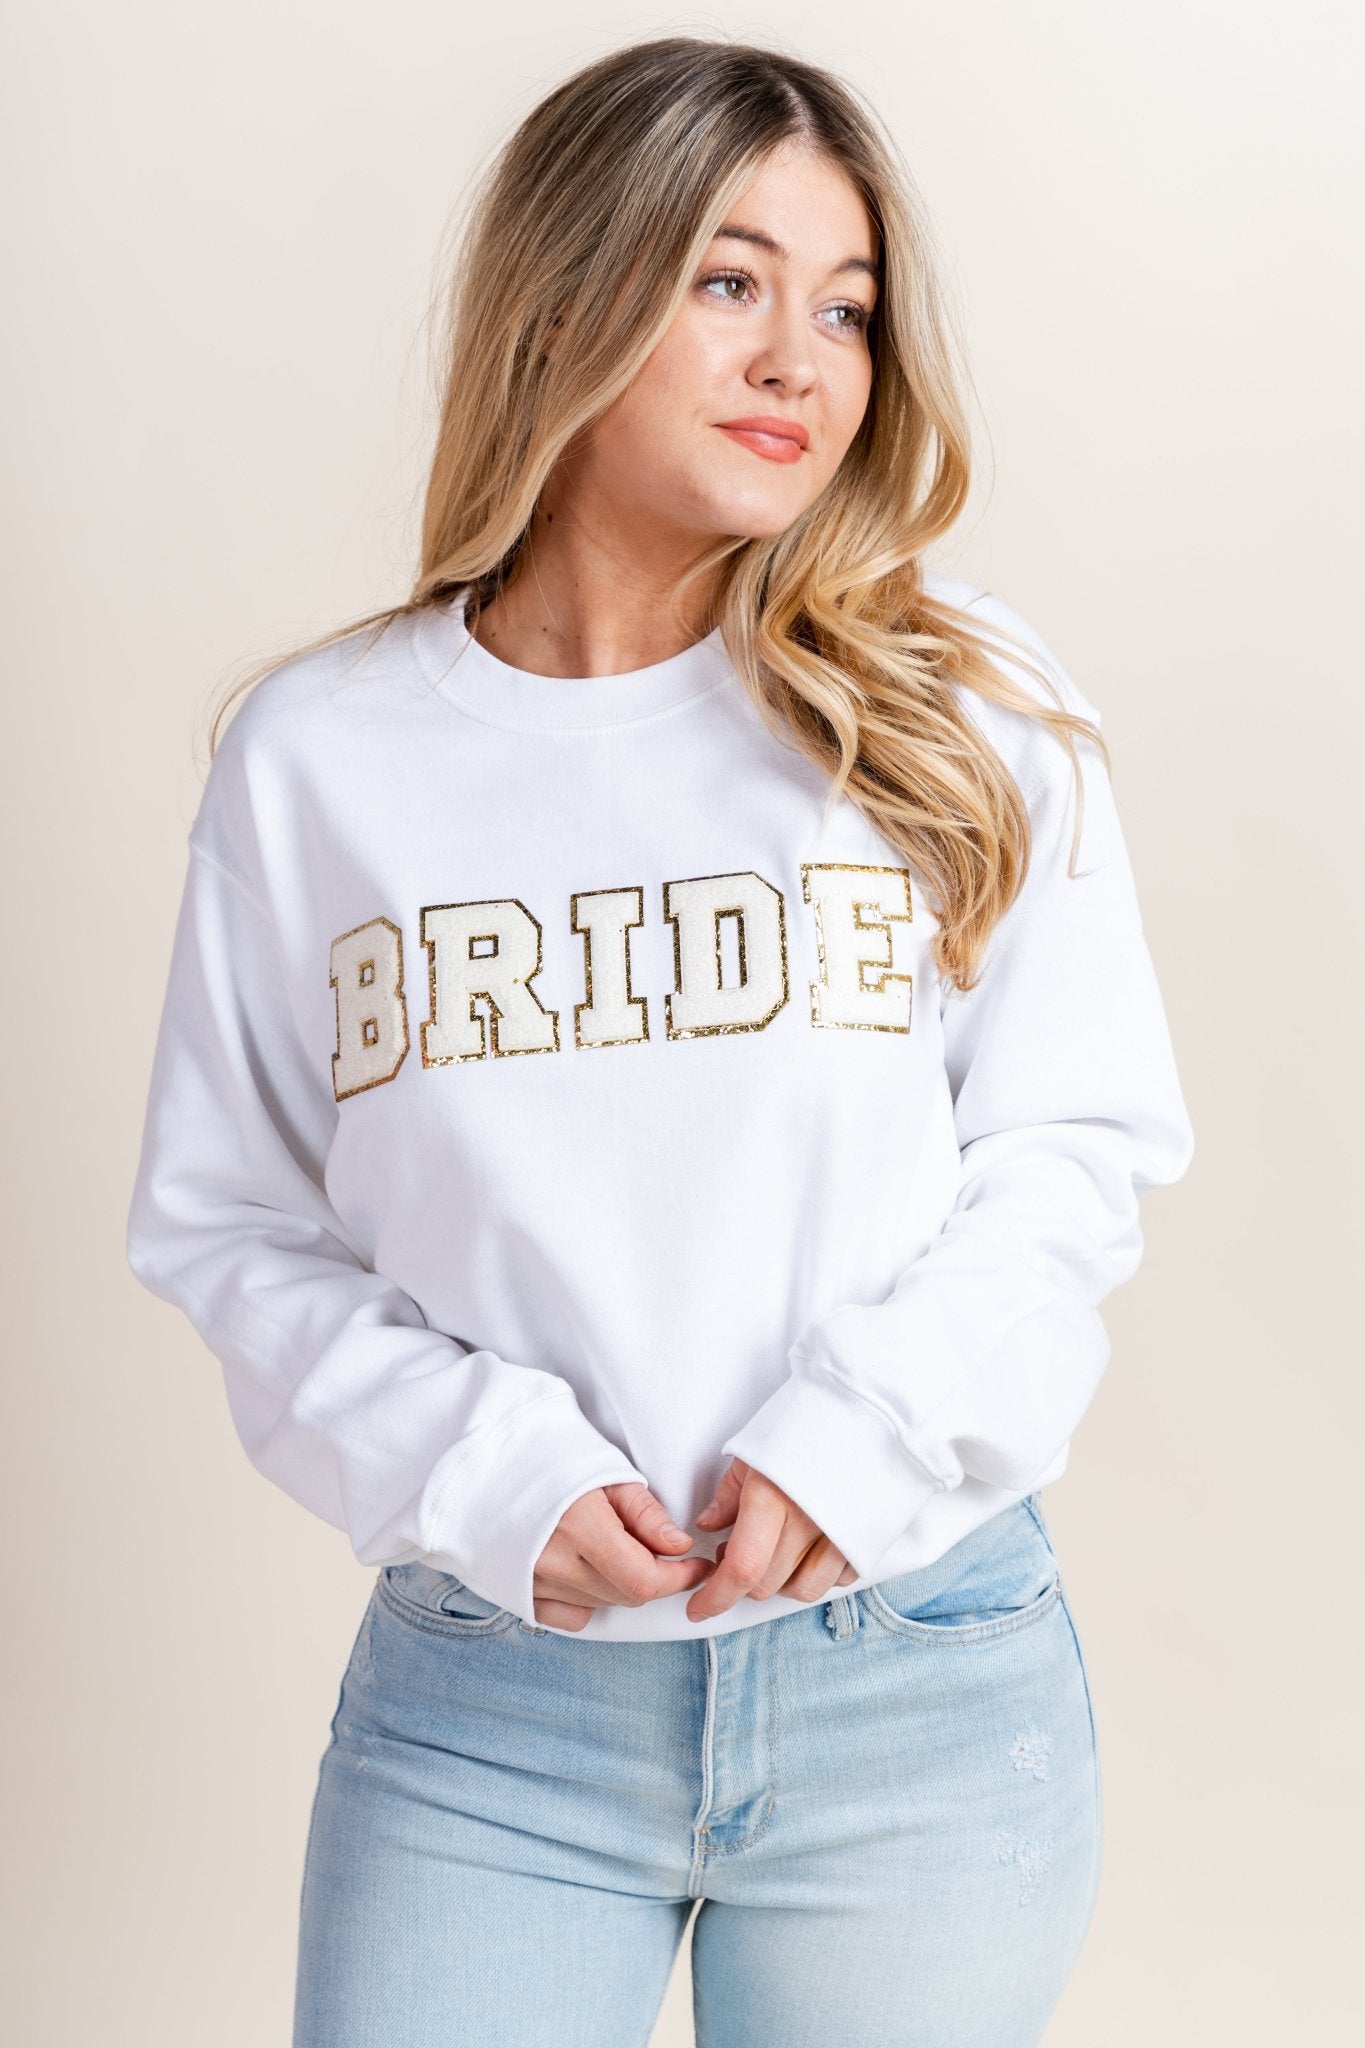 Bride patch sweatshirt white - Trendy Sweatshirt - Fun Wedding Party Outfits at Lush Fashion Lounge Boutique in Oklahoma City